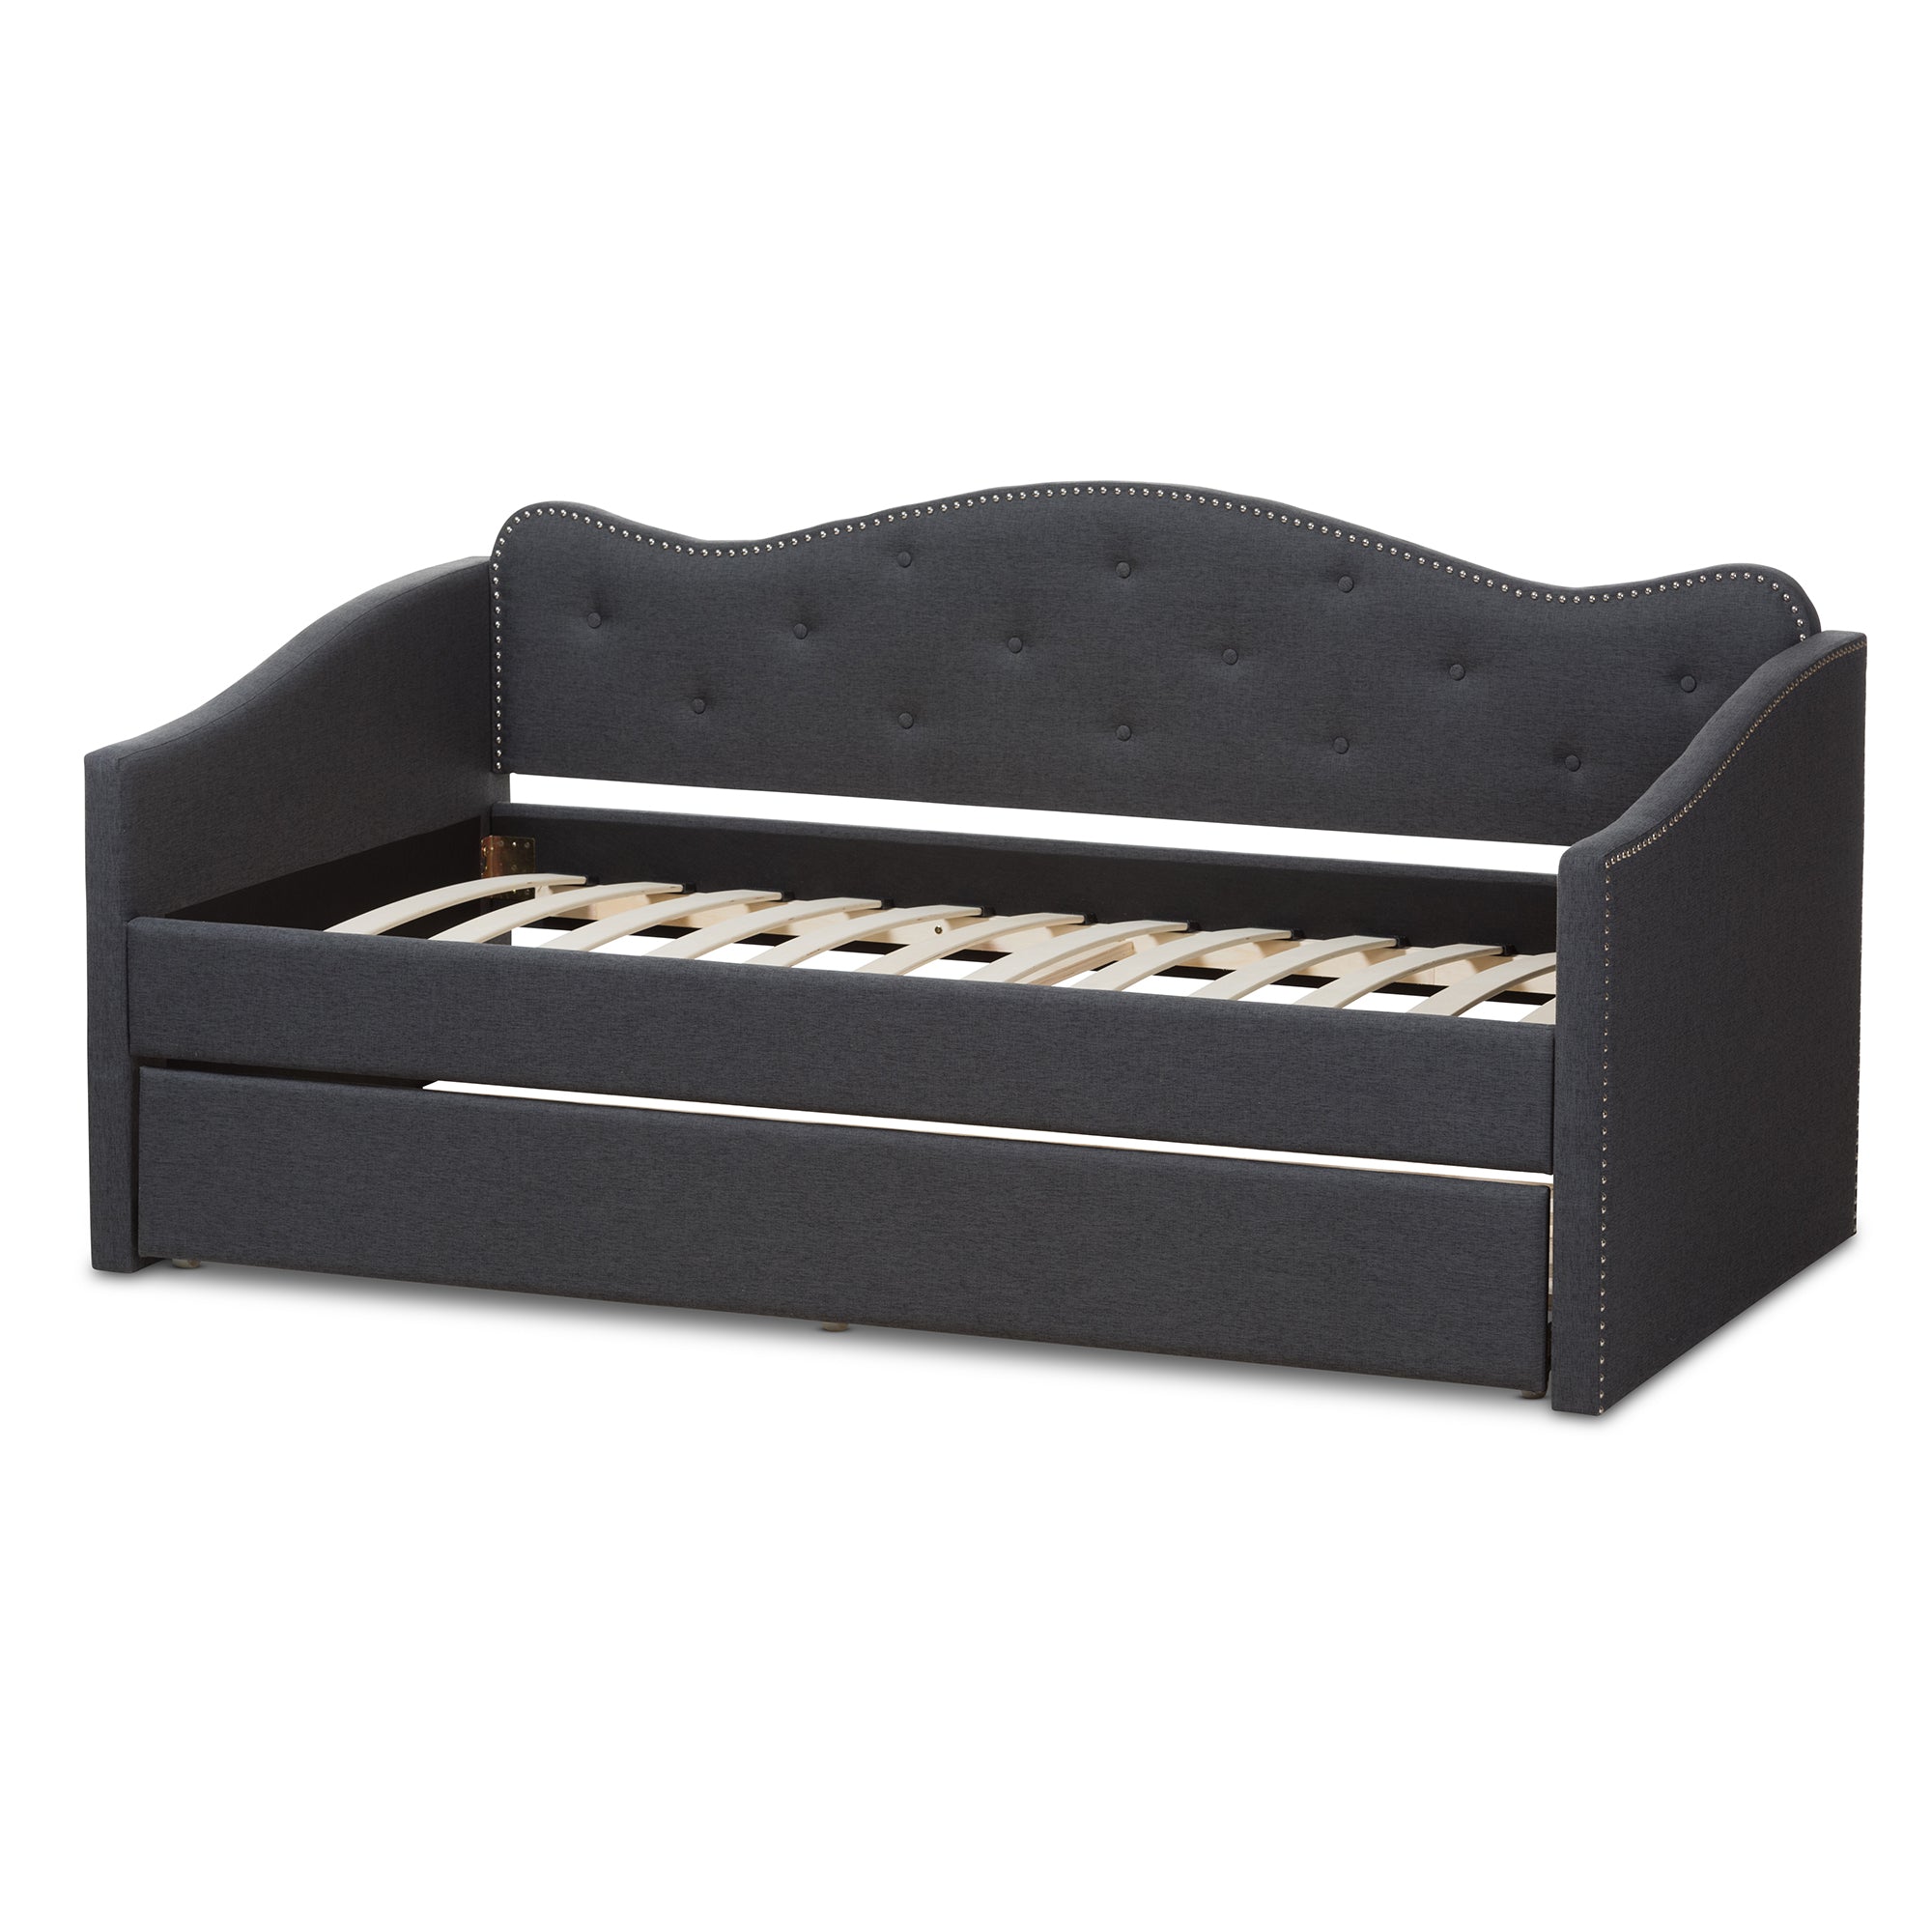 Kaija Contemporary Daybed with Trundle-Daybed-Baxton Studio - WI-Wall2Wall Furnishings